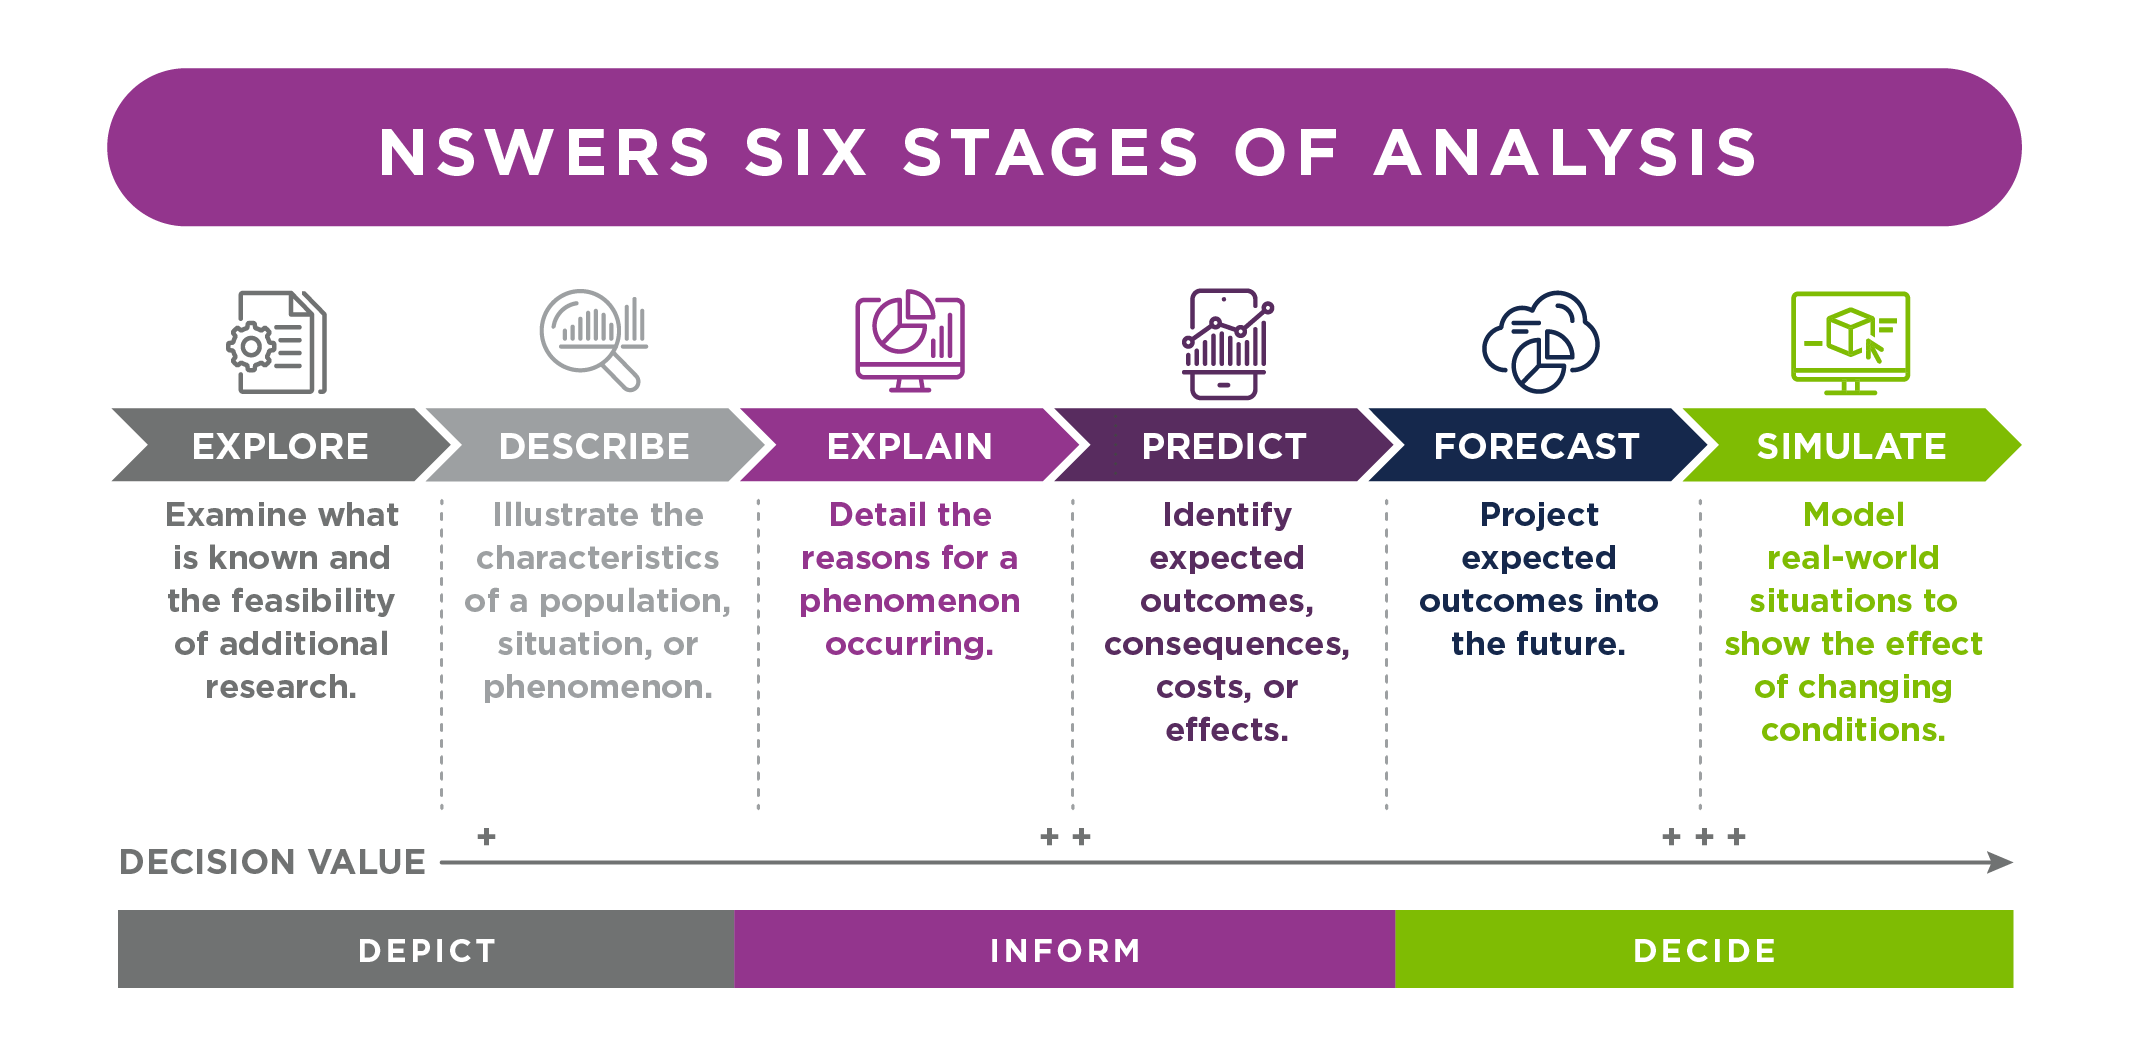 The NSWERS six stages of analysis leads the research from explore through describe, explain, predict, forecast, and finally to simulate; each stage is progressively more sophisticated and capable of aiding in decision makers.